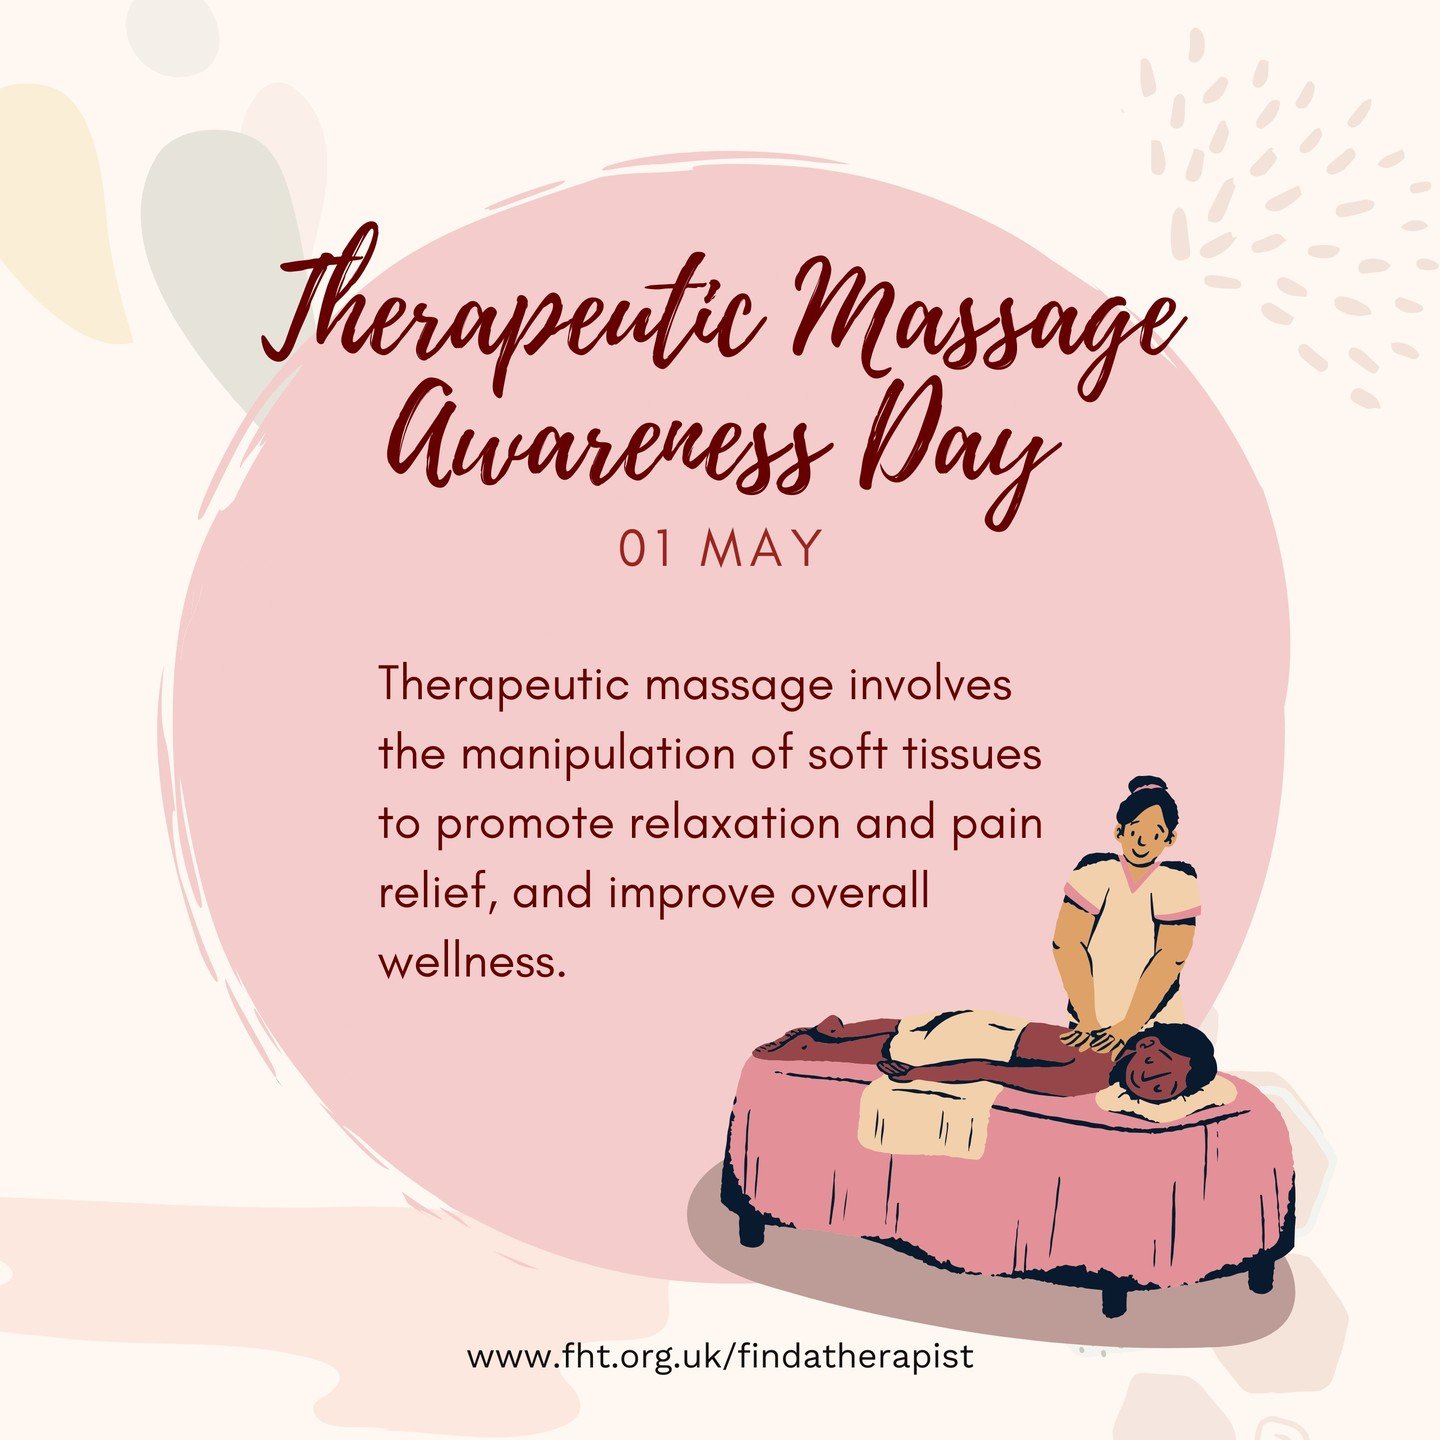 T H E R A P E U T I C / M A S S A G E
I offer gentle restorative massage treatments here at the cabin. Visit the link in my bio to find out how I can help you find calm again.

#therapeuticmassageday #massageawareness #holistictherapy #massagetherapi